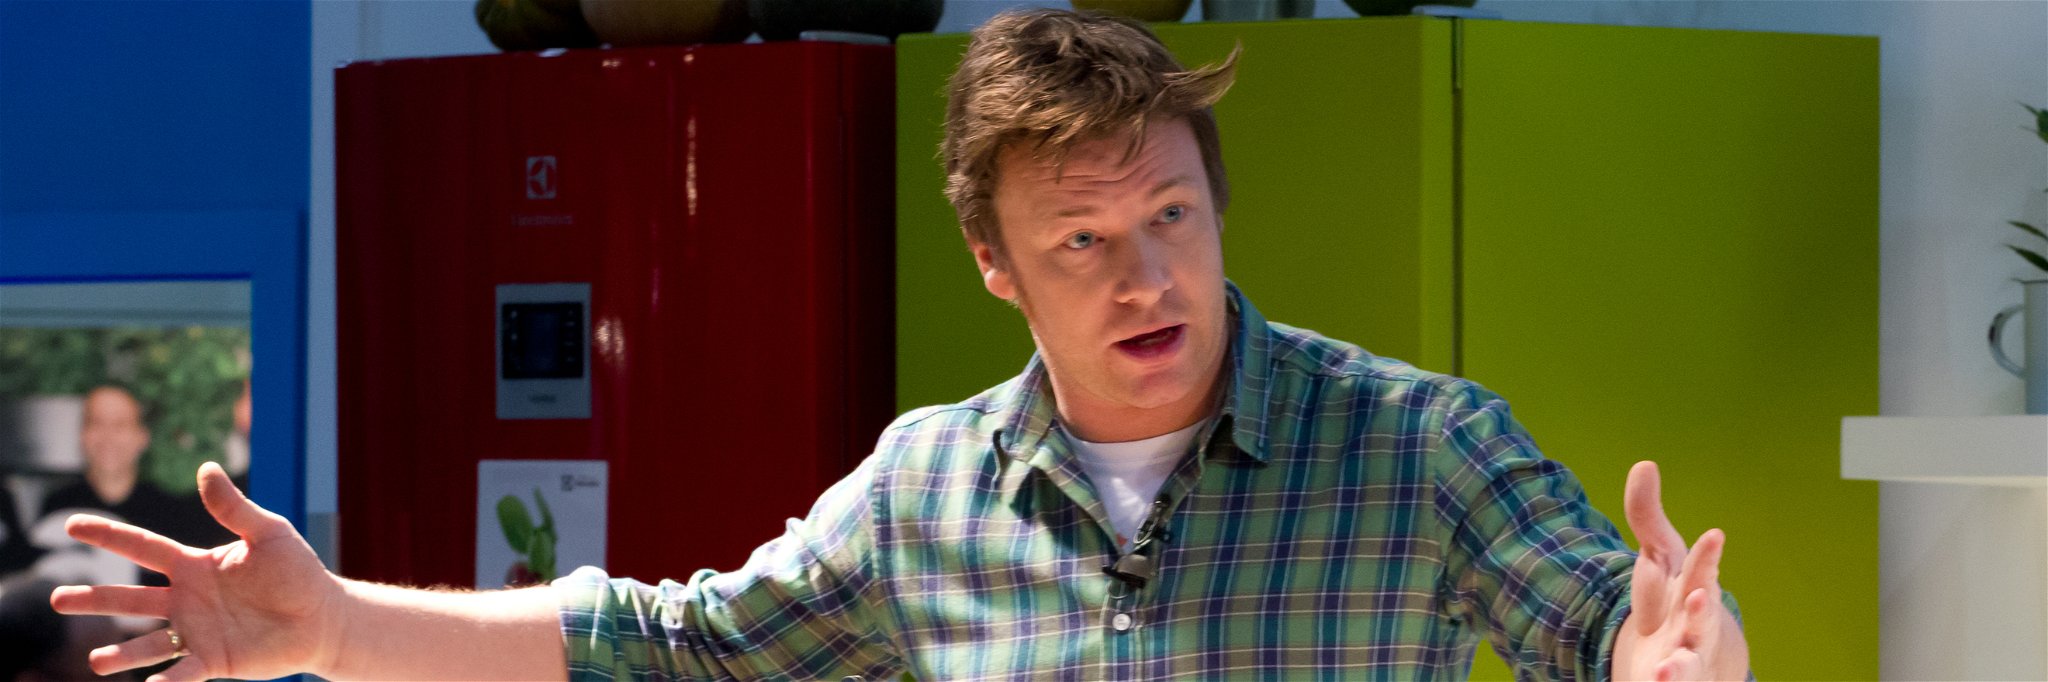 Celebrity Chef Jamie Oliver Conducting a Cooking Demonstration.